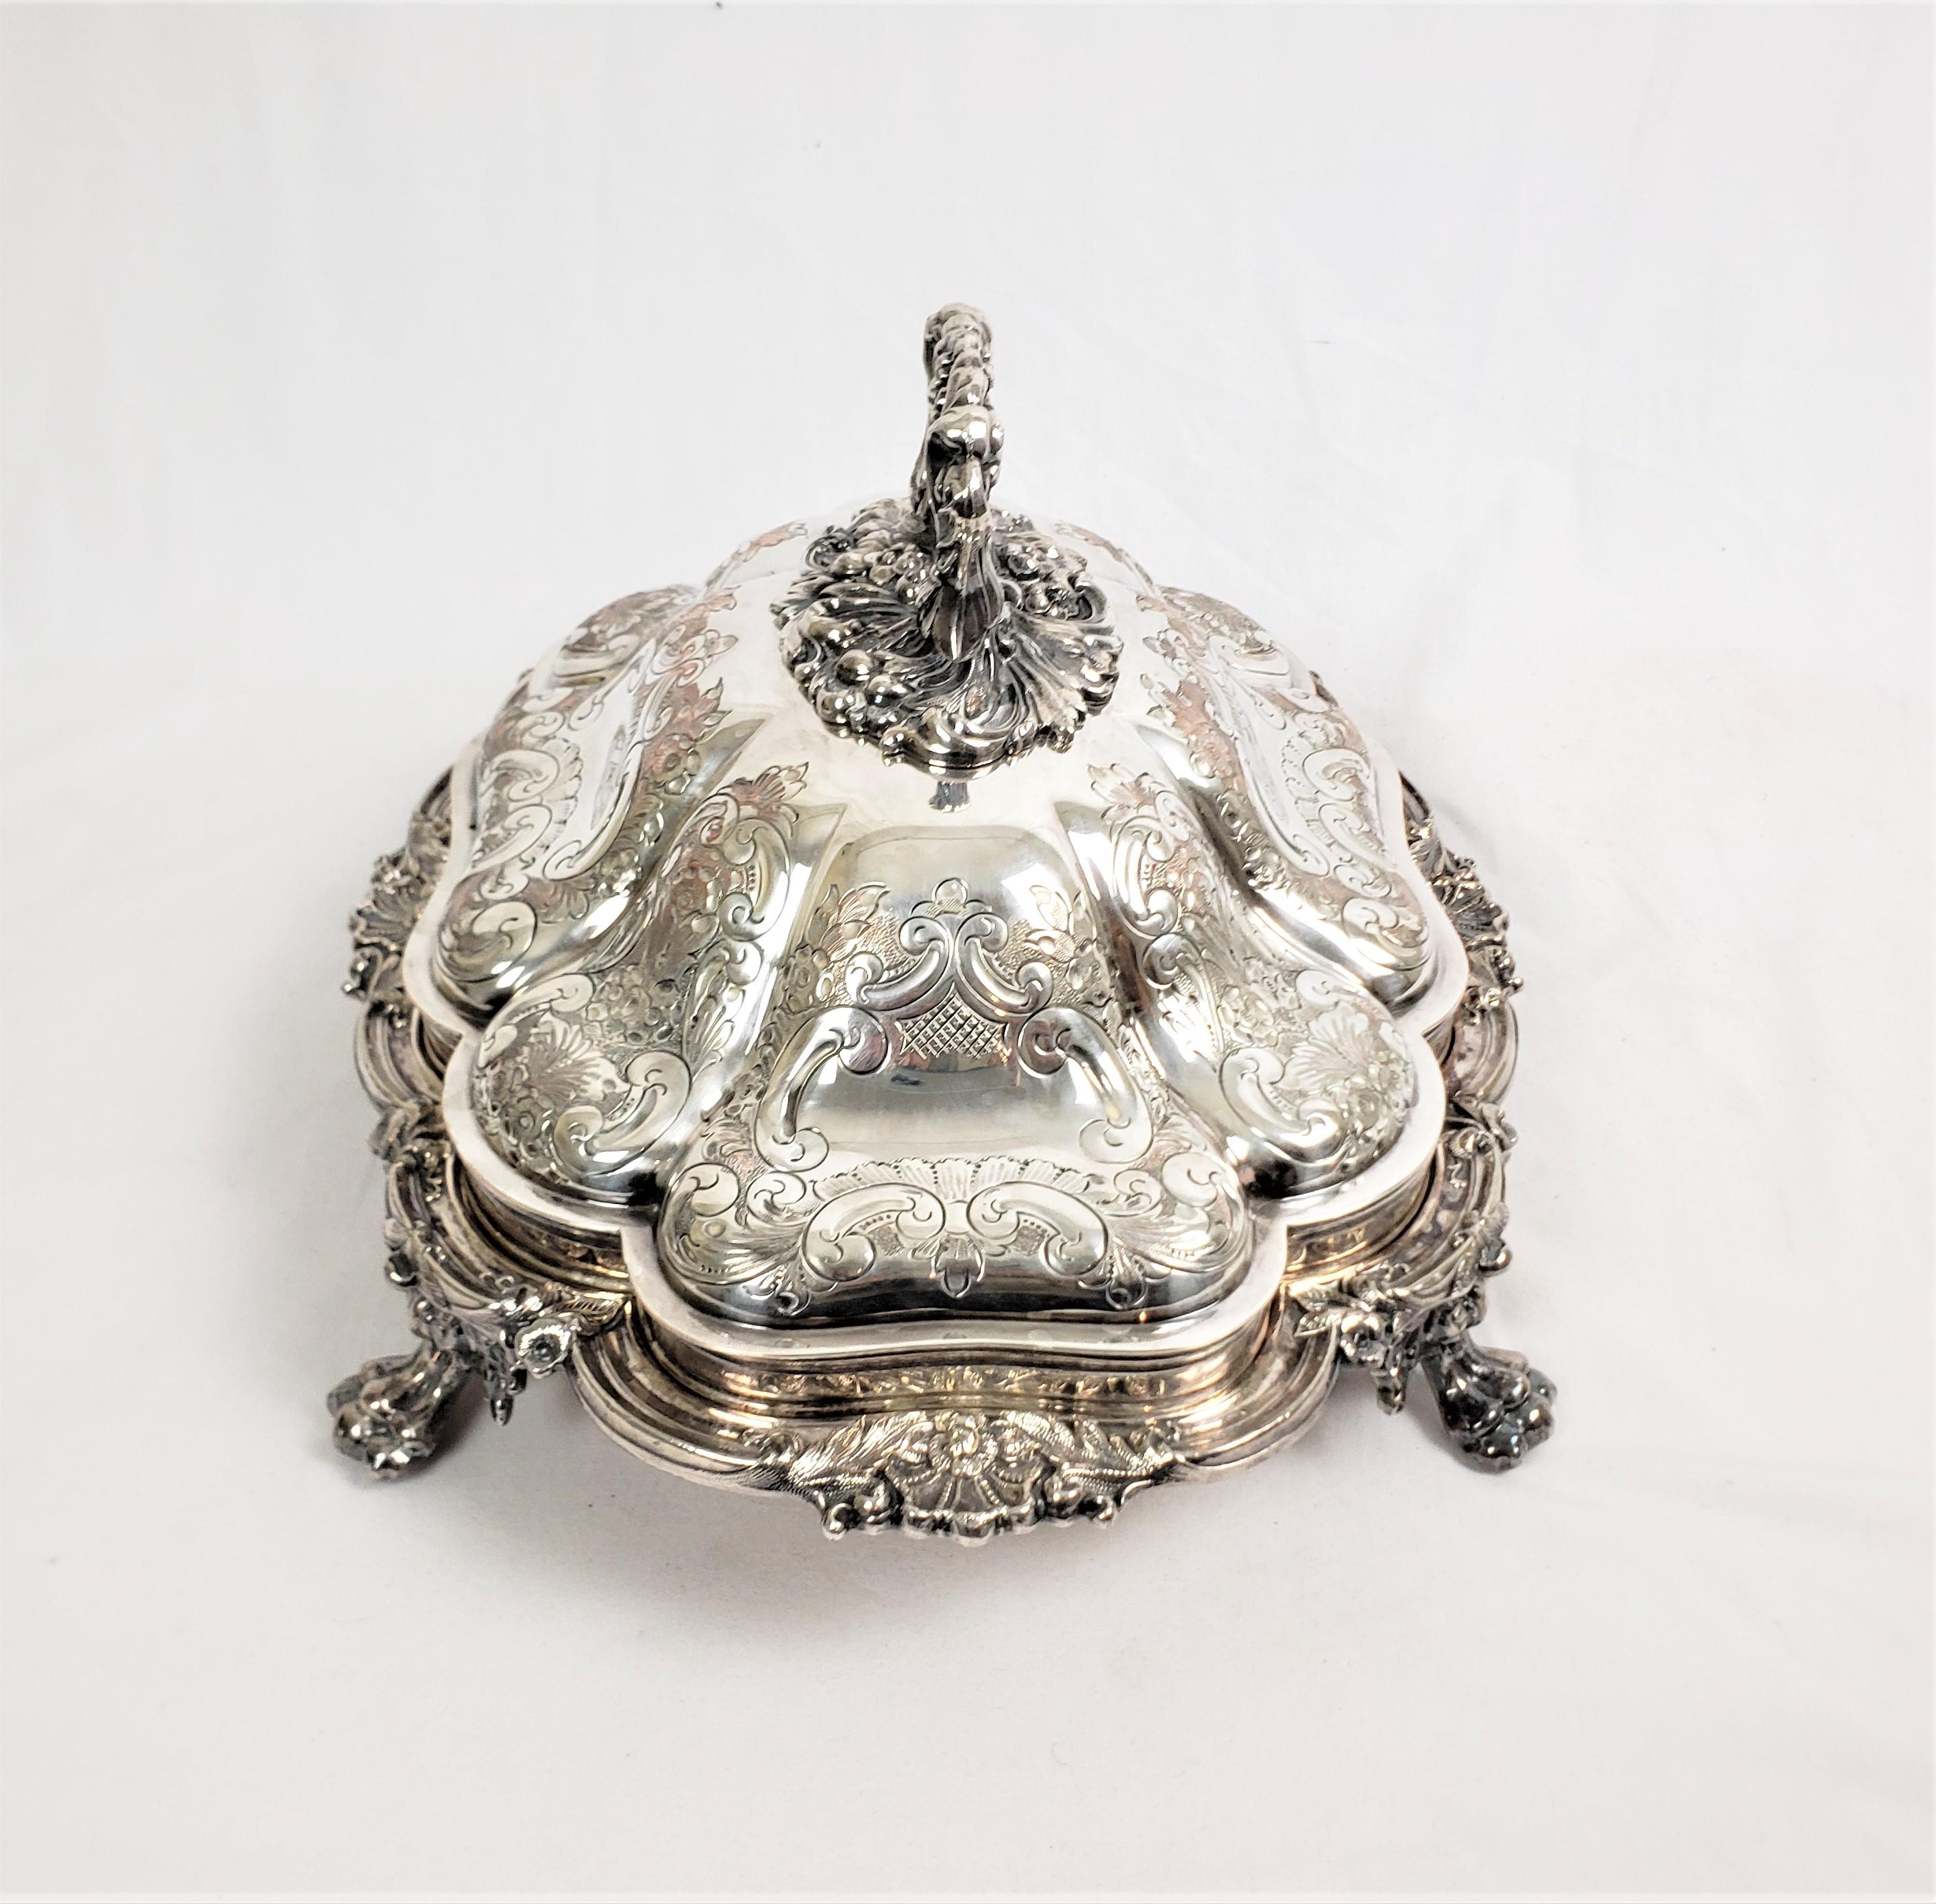 English Antique Barker-Ellis Silver Plated Covered Entree Server with Floral Decoration For Sale